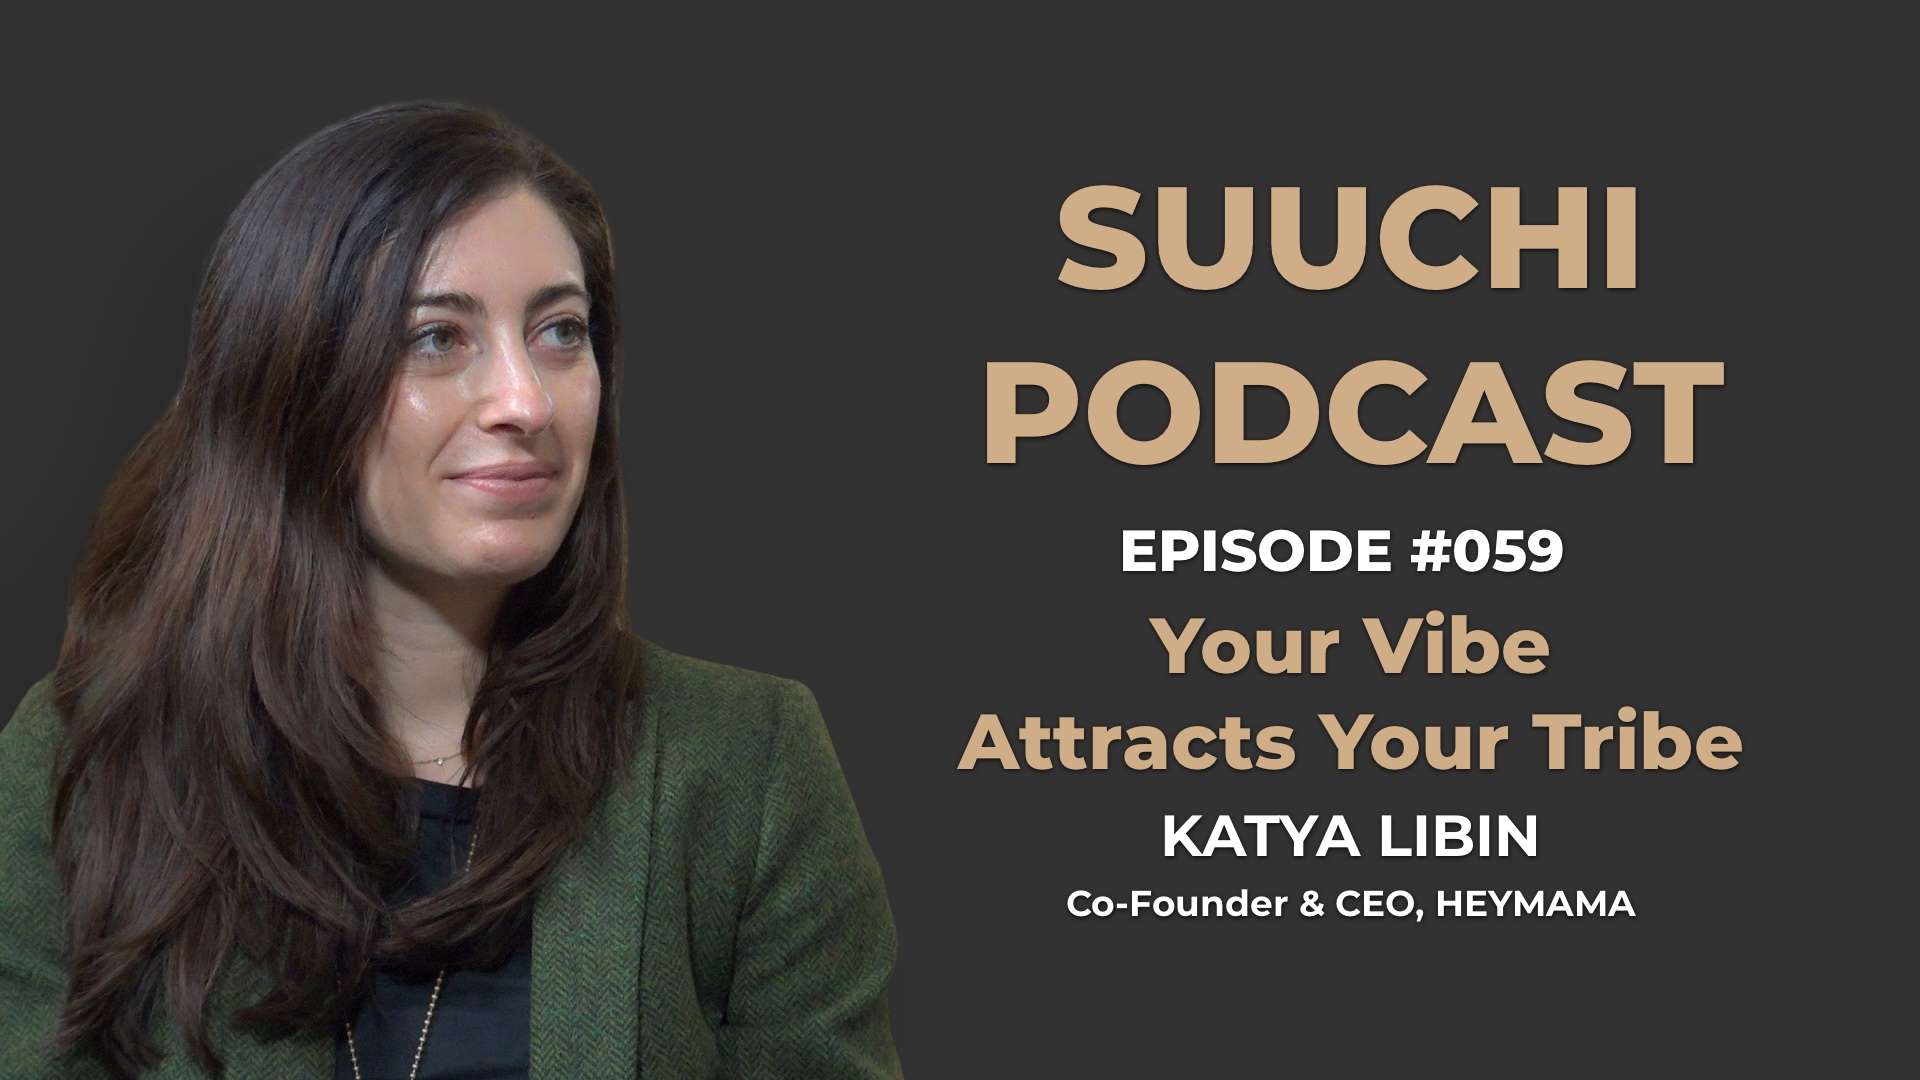 Suuchi Podcast #59: Katya Libin, CEO & Co-Founder of HeyMama - Your Vibe Attracts Your Tribe